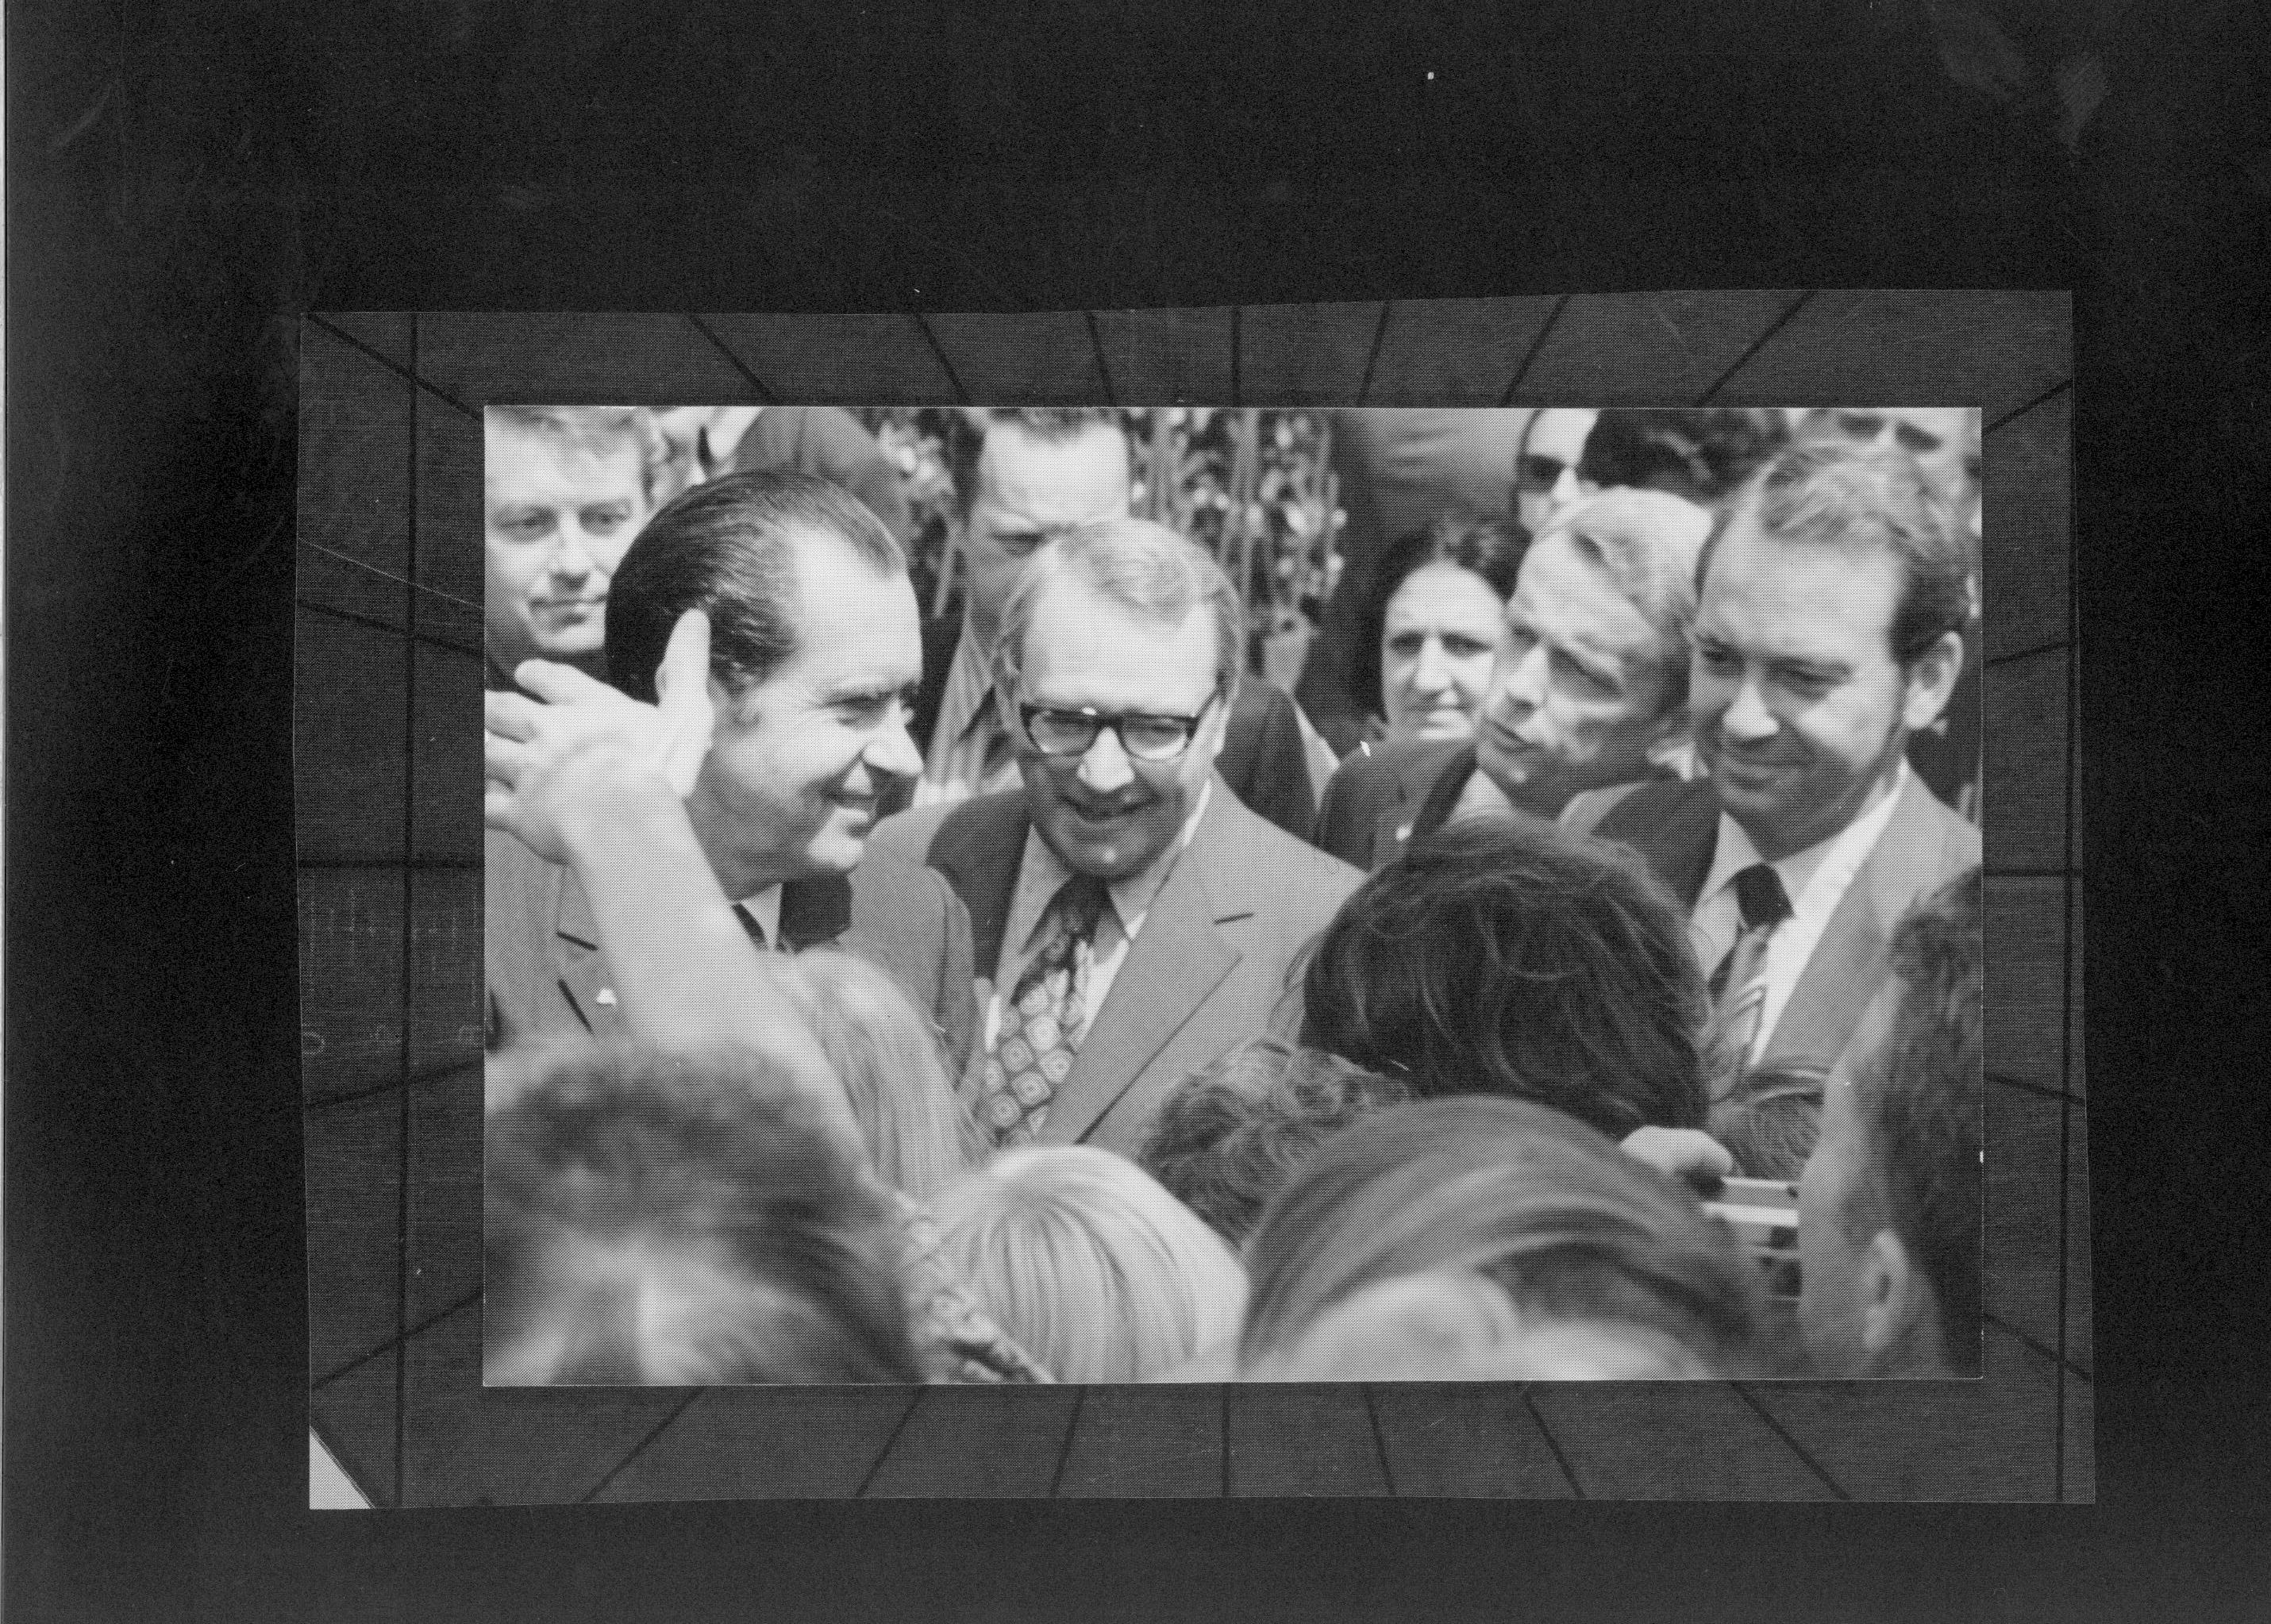 20th District Congressman, Paul Findley introduces some of the people to the President outside the Old State Capitol. White House correspondent Helen Thomas can be seen behind Gov. Ogilivie and Congressman Findley 